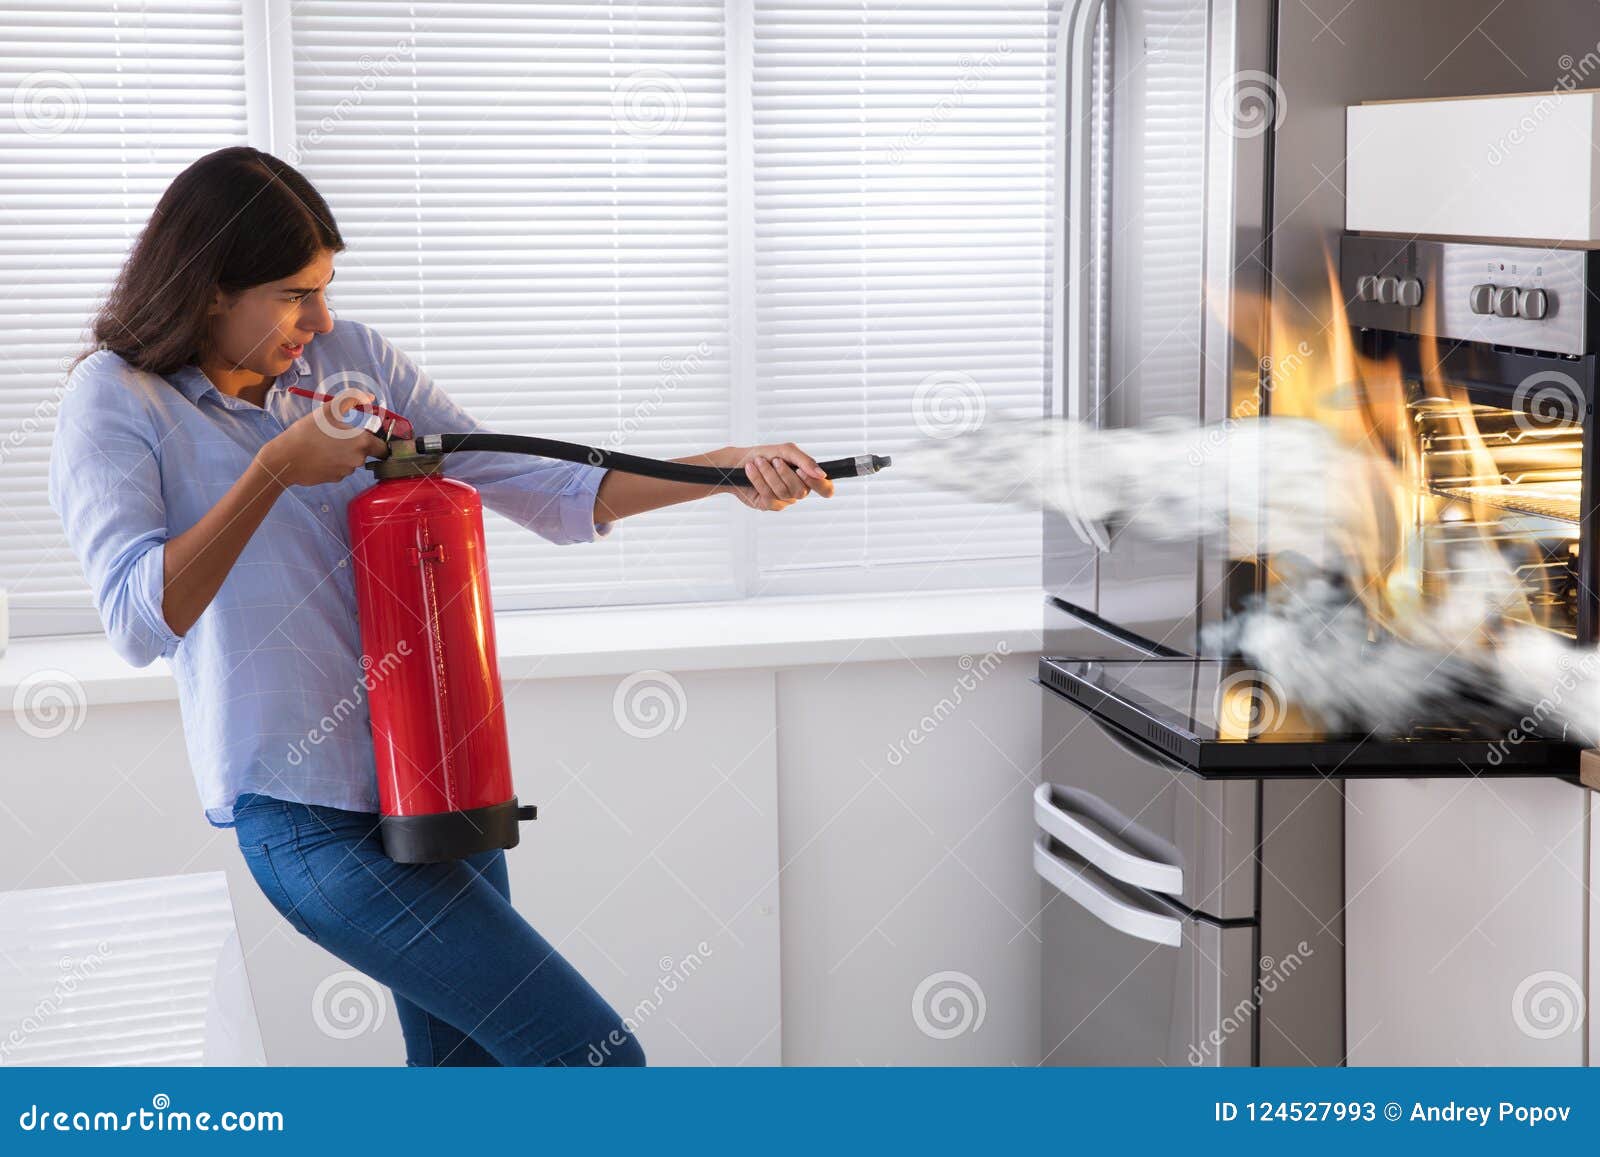 woman using fire extinguisher to put out fire from oven